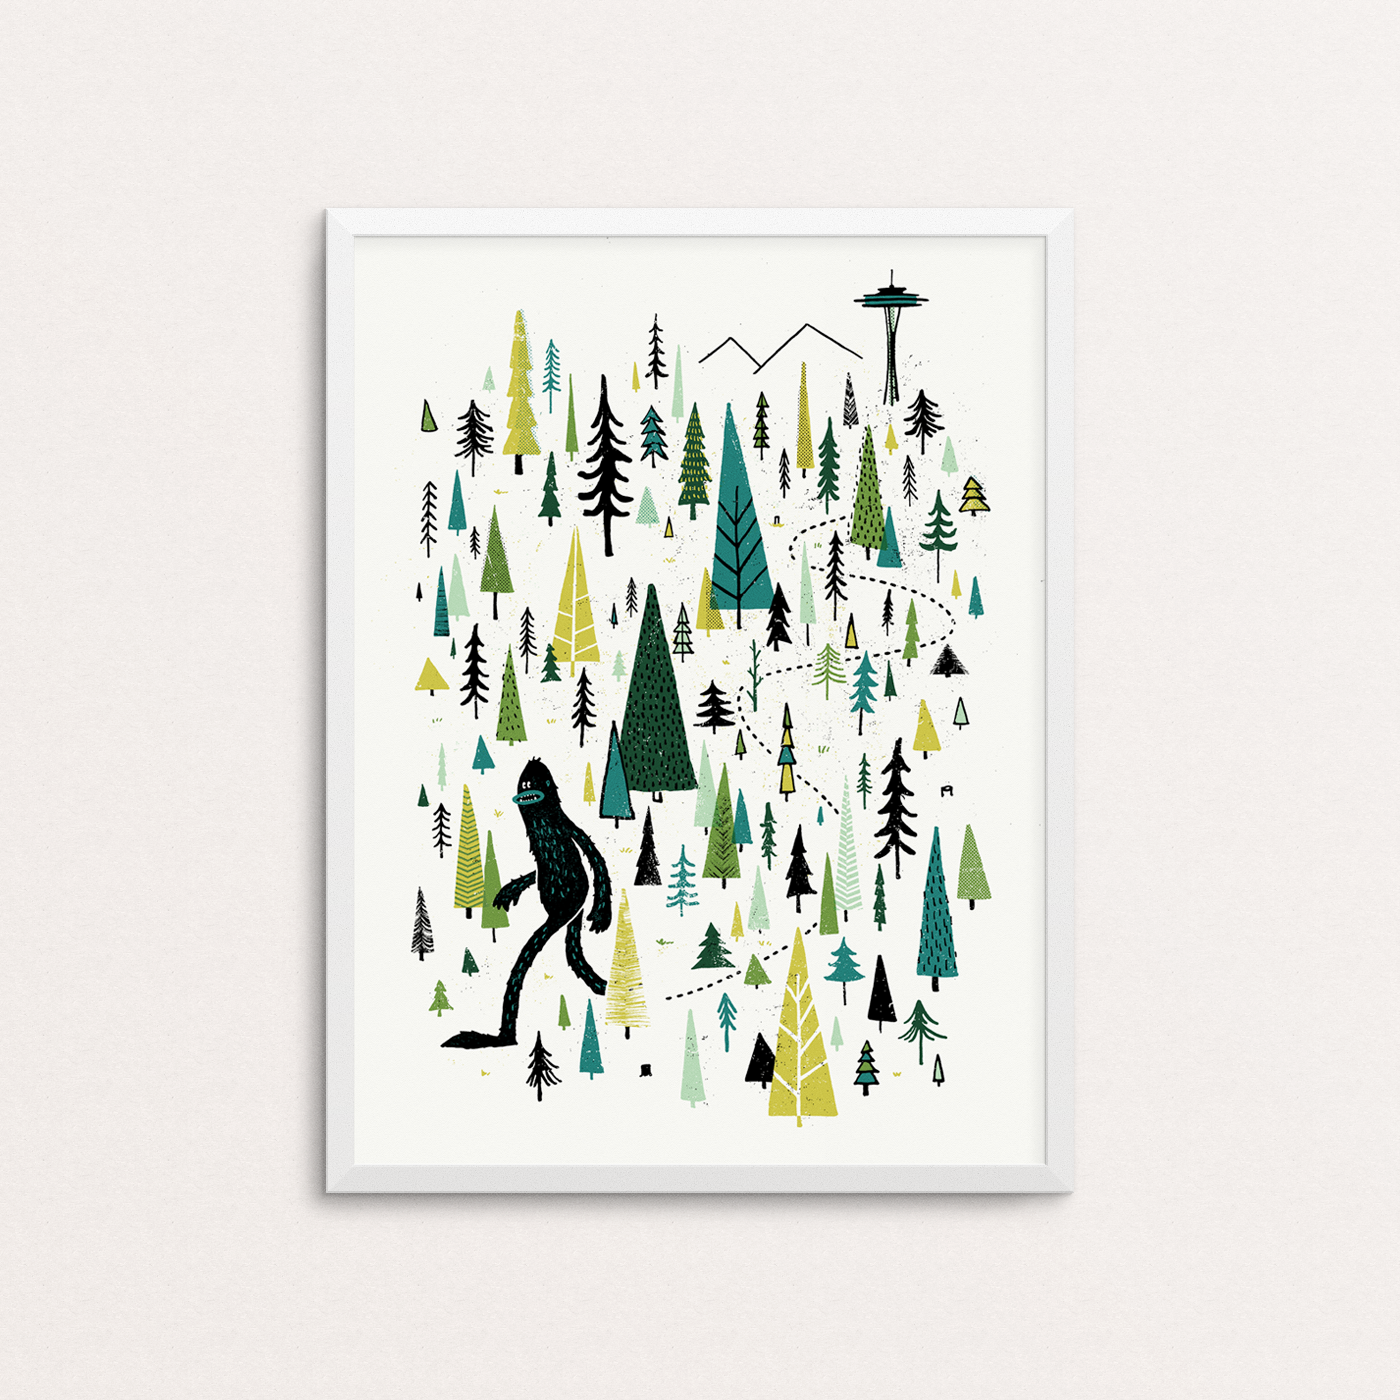 Sasquatch or Big Foot walking in the forest from mountains and the Seattle Space Needle. The illustration is screen printed on white paper with various greens and black inks.